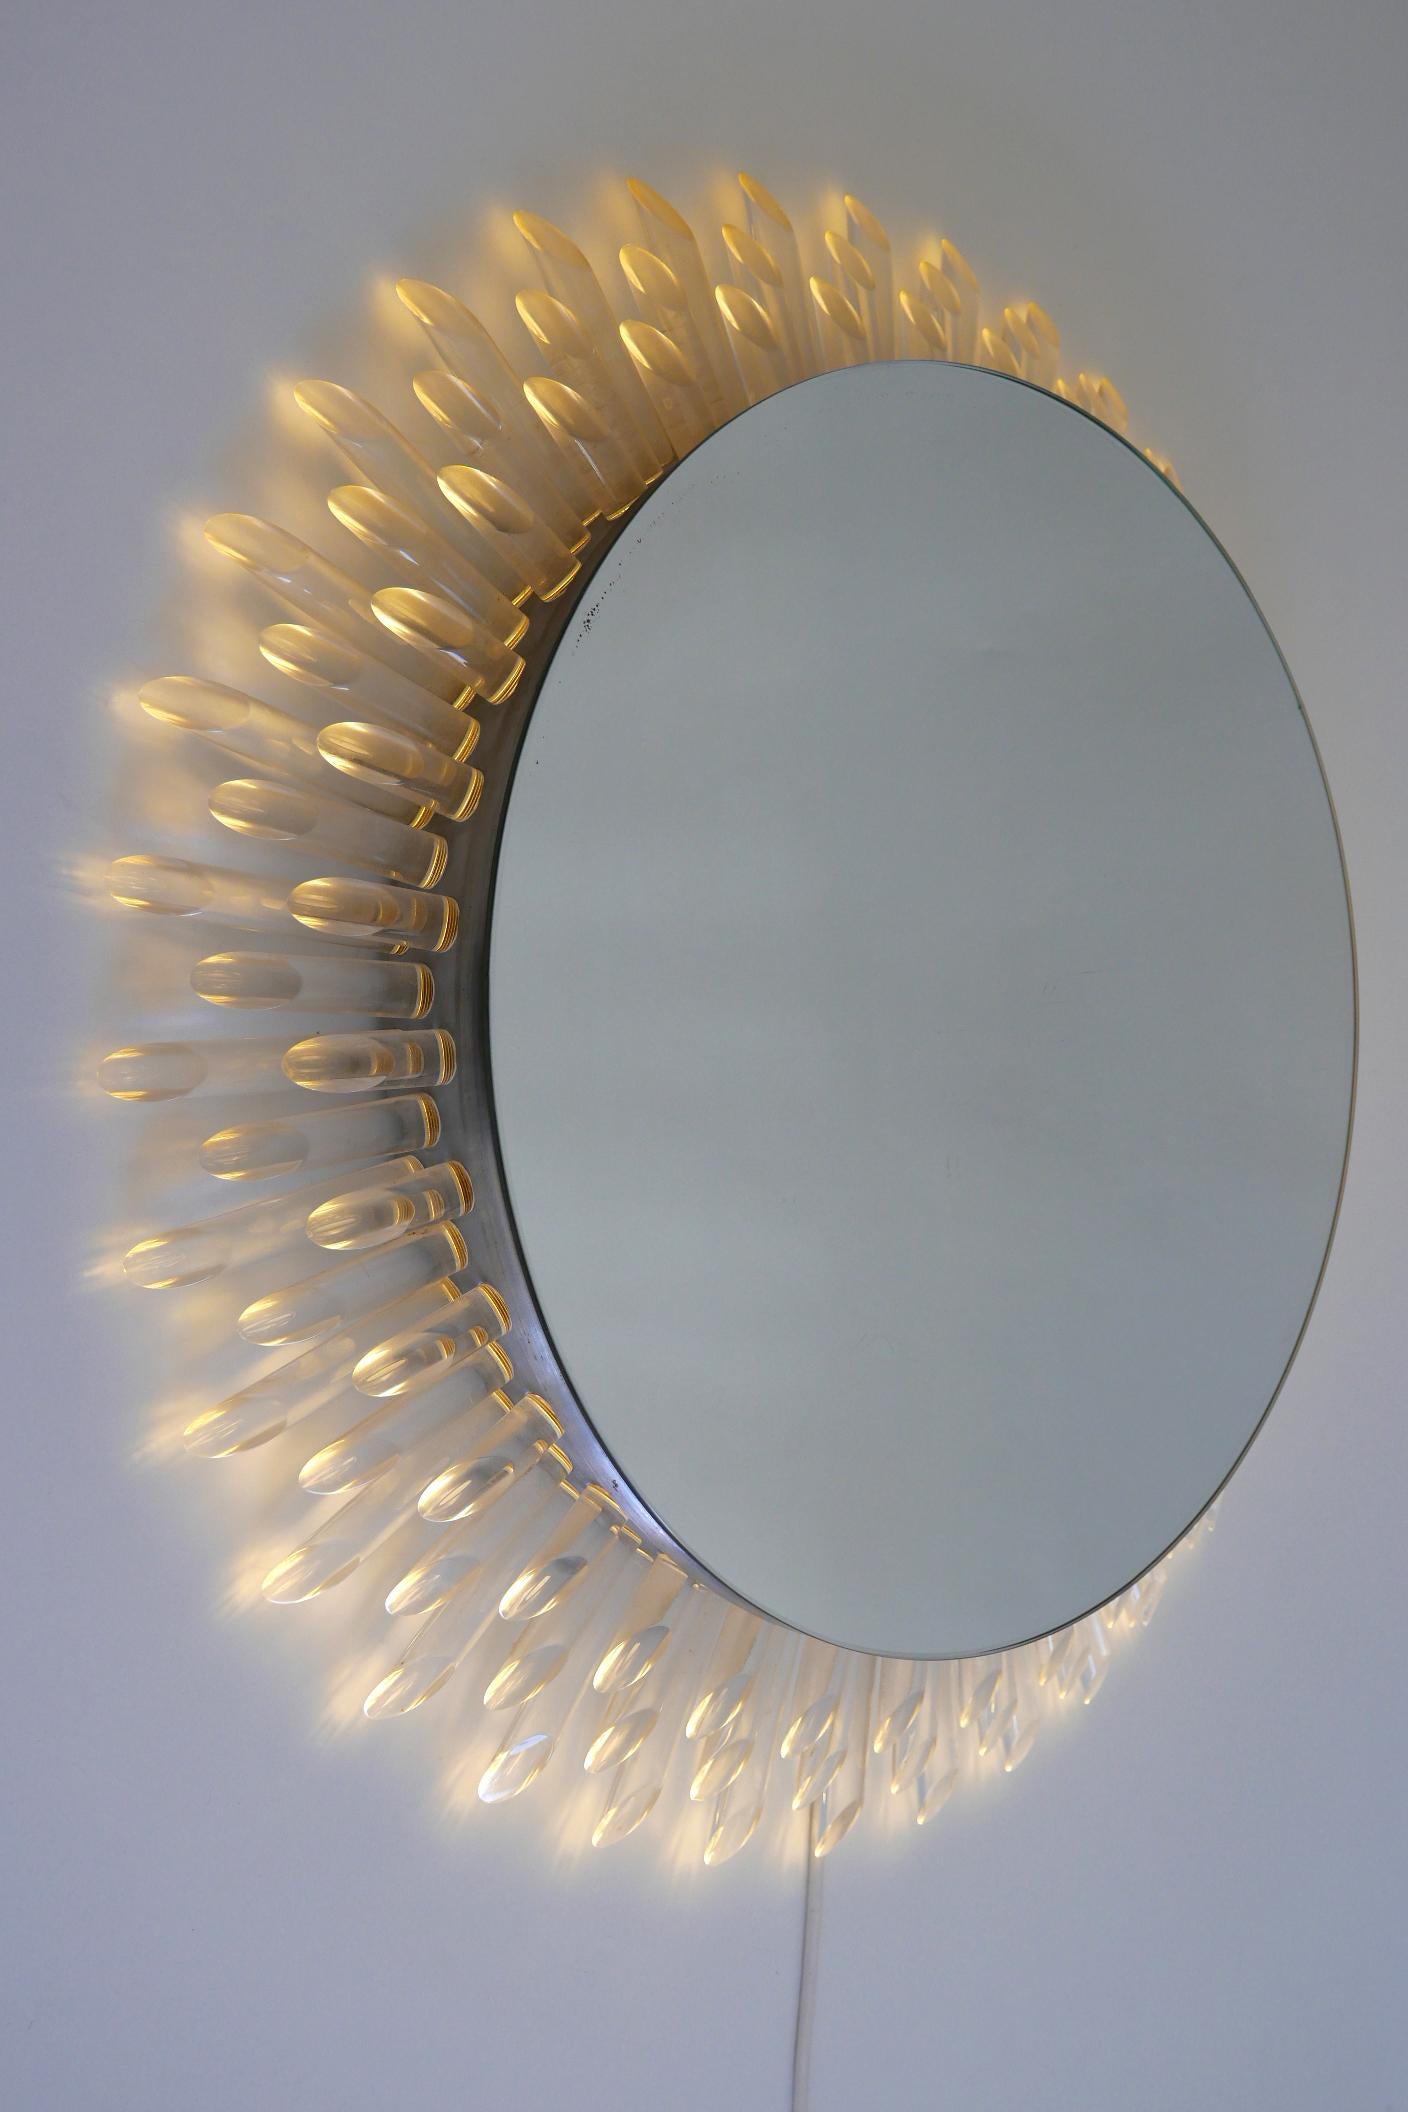 Spectacular Large Mid-Century Modern Backlit Sunburst Wall Mirror Germany 1970s For Sale 5